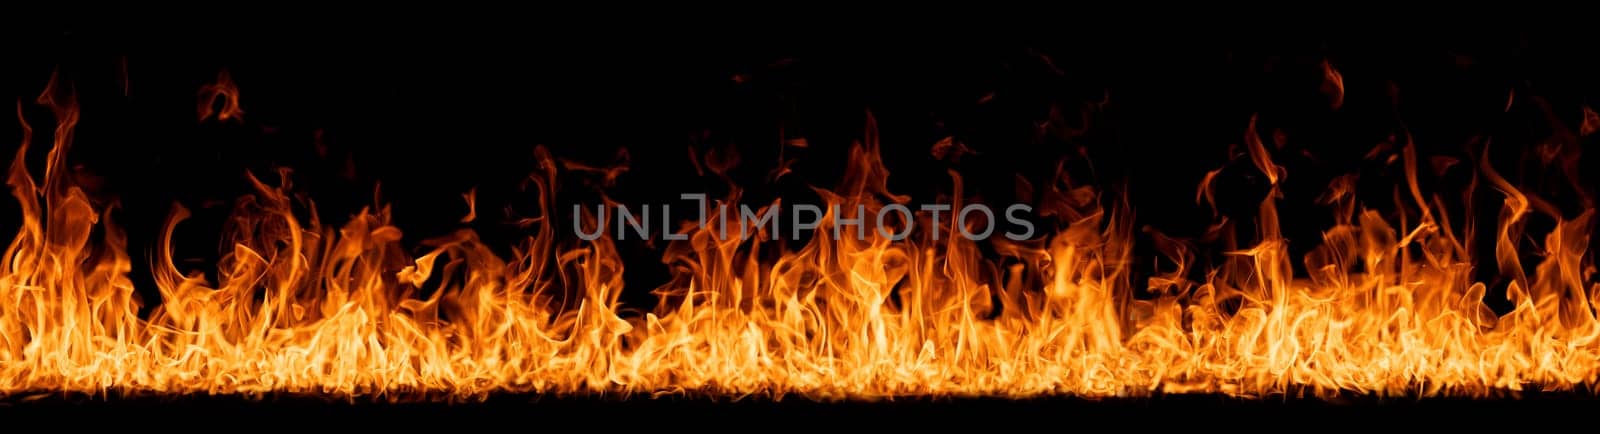 Hell flames, devil's mouth. fire banner. A background of scalding flames. Firestorm. Fire burning. Bright burning flames on a black background. Wall of Real fire, abstract background. Fire flames by EvgeniyQW